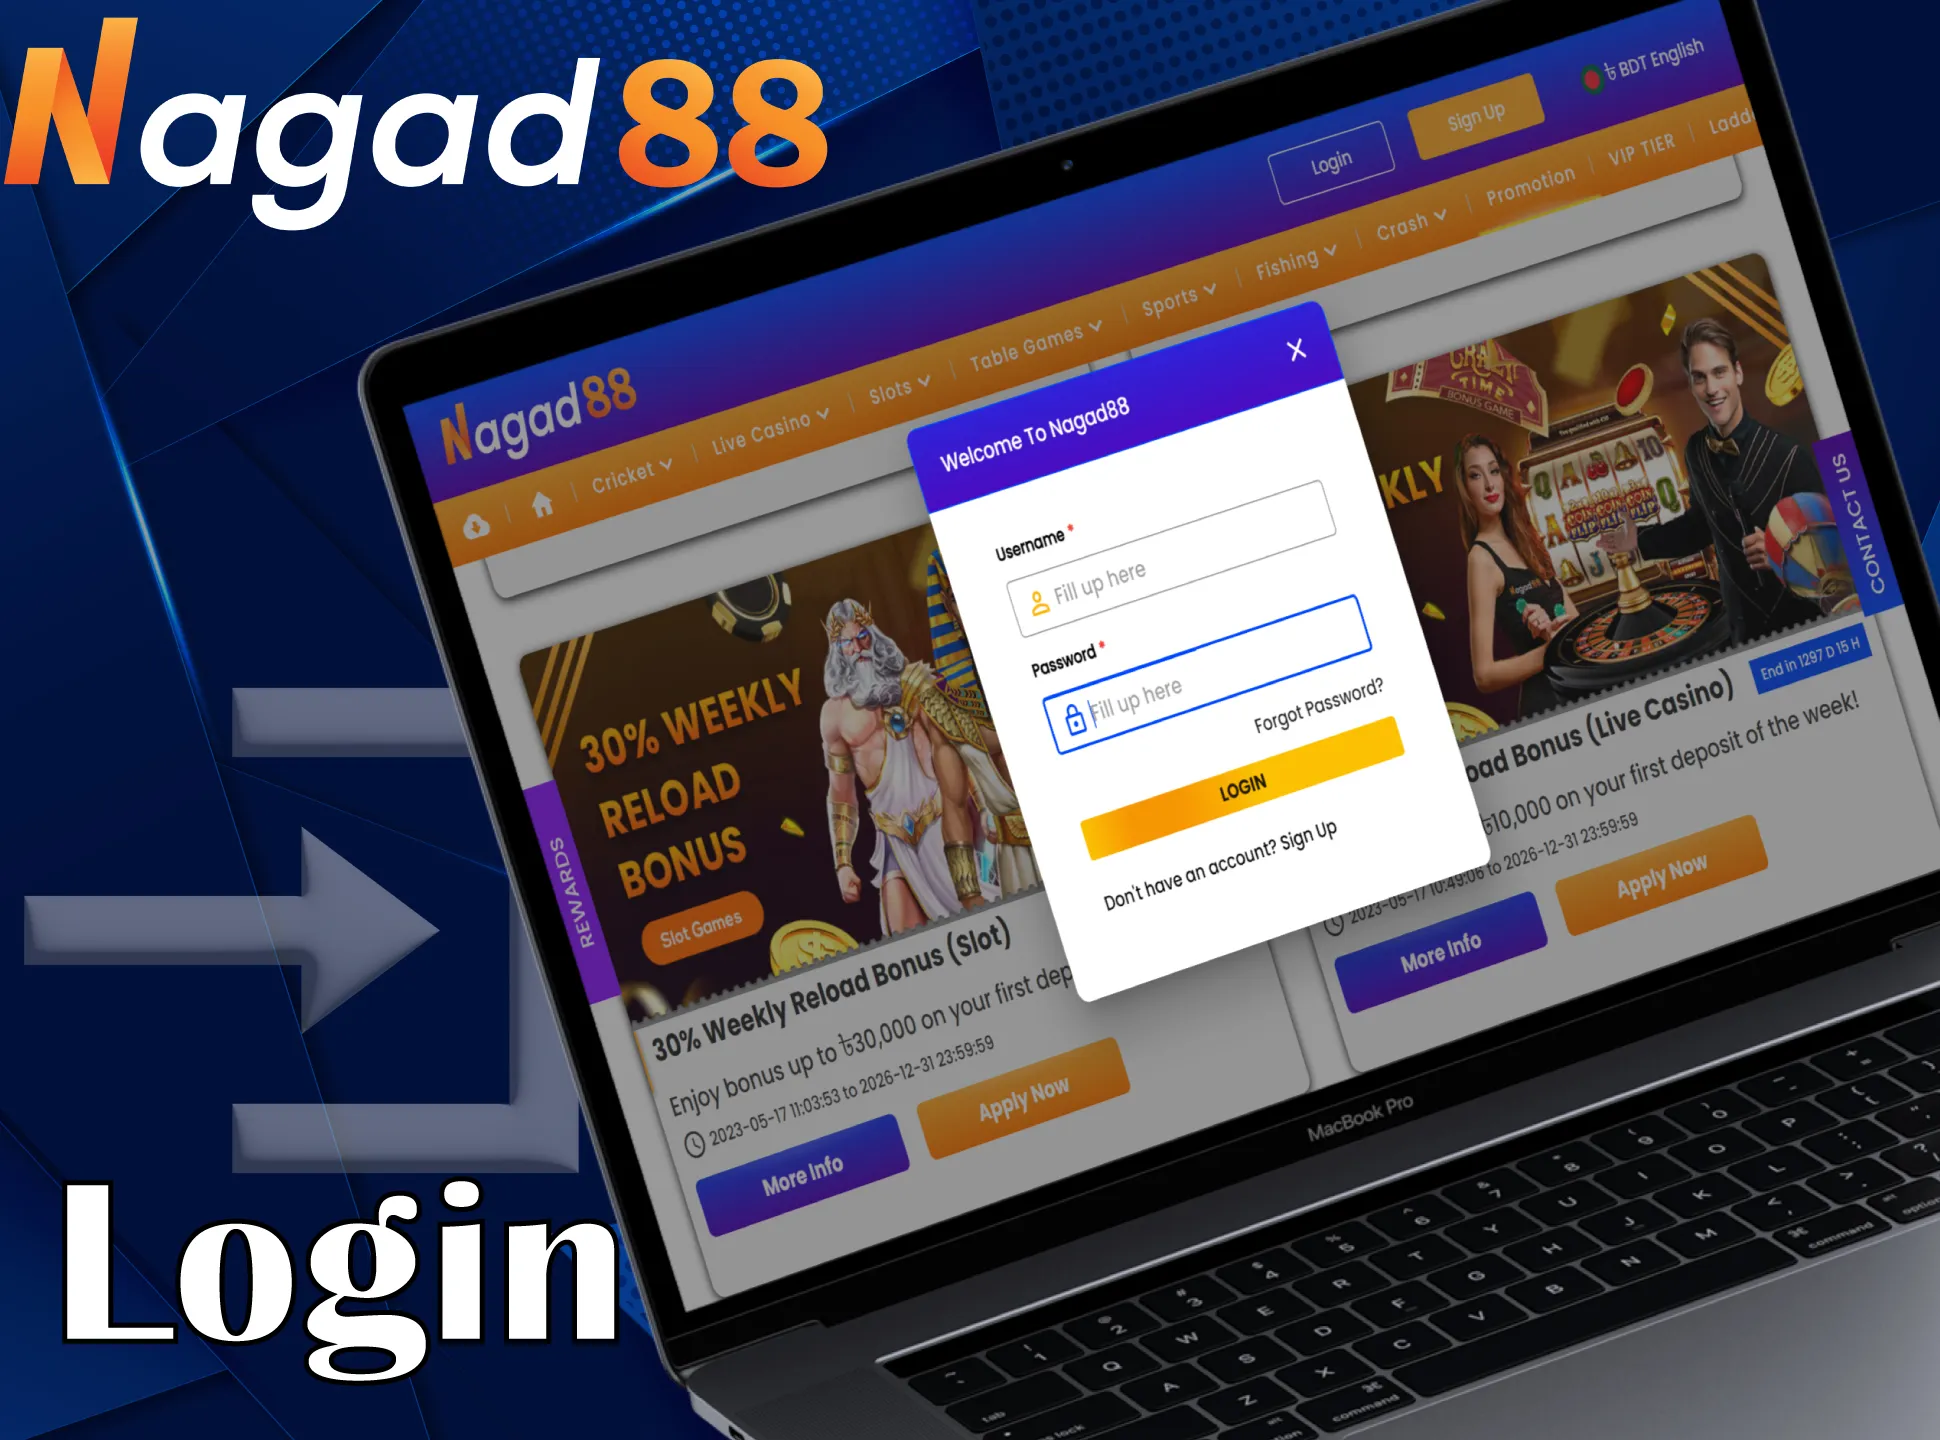 Log in to your Nagad88 account to access all features.